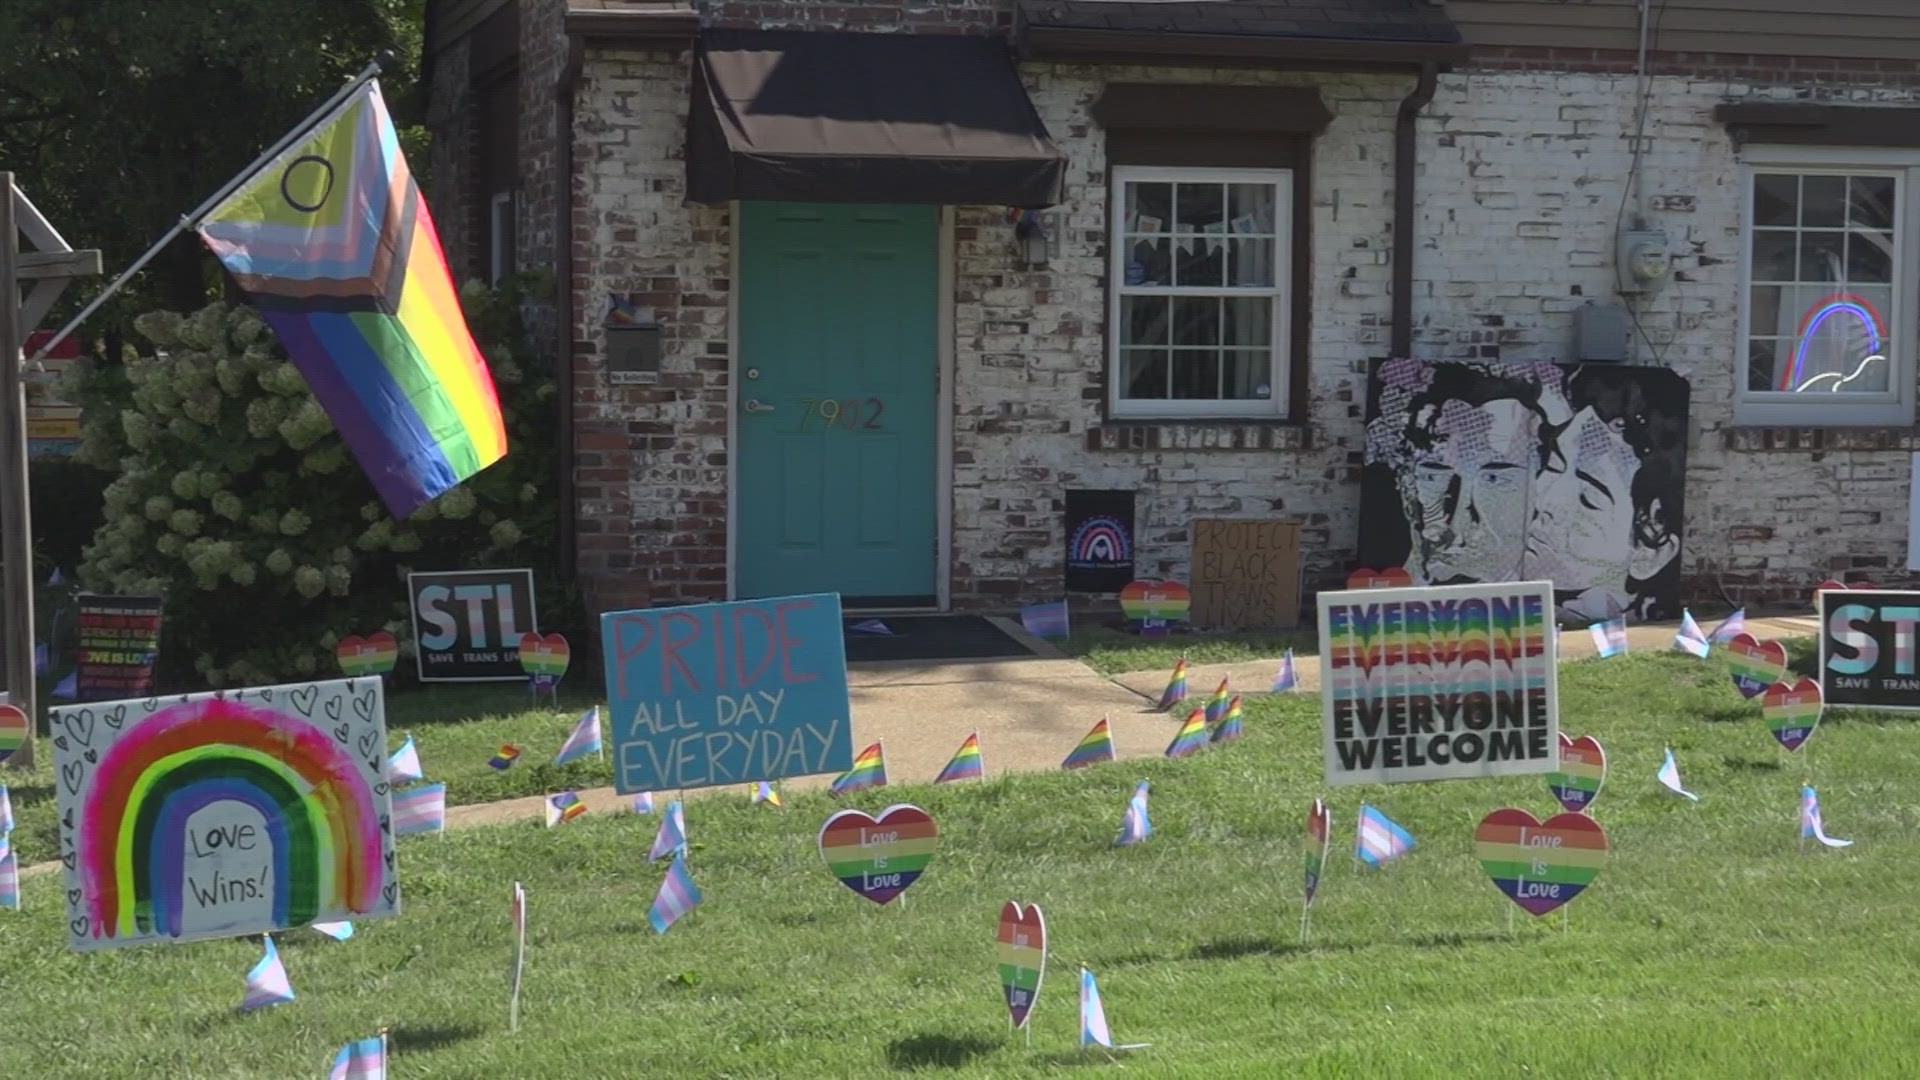 Kelly Storck has made a bad situation positive after a hate crime. Storck's transgender pride flag was burned and a "Save Trans Lives" sign were stolen Tuesday.